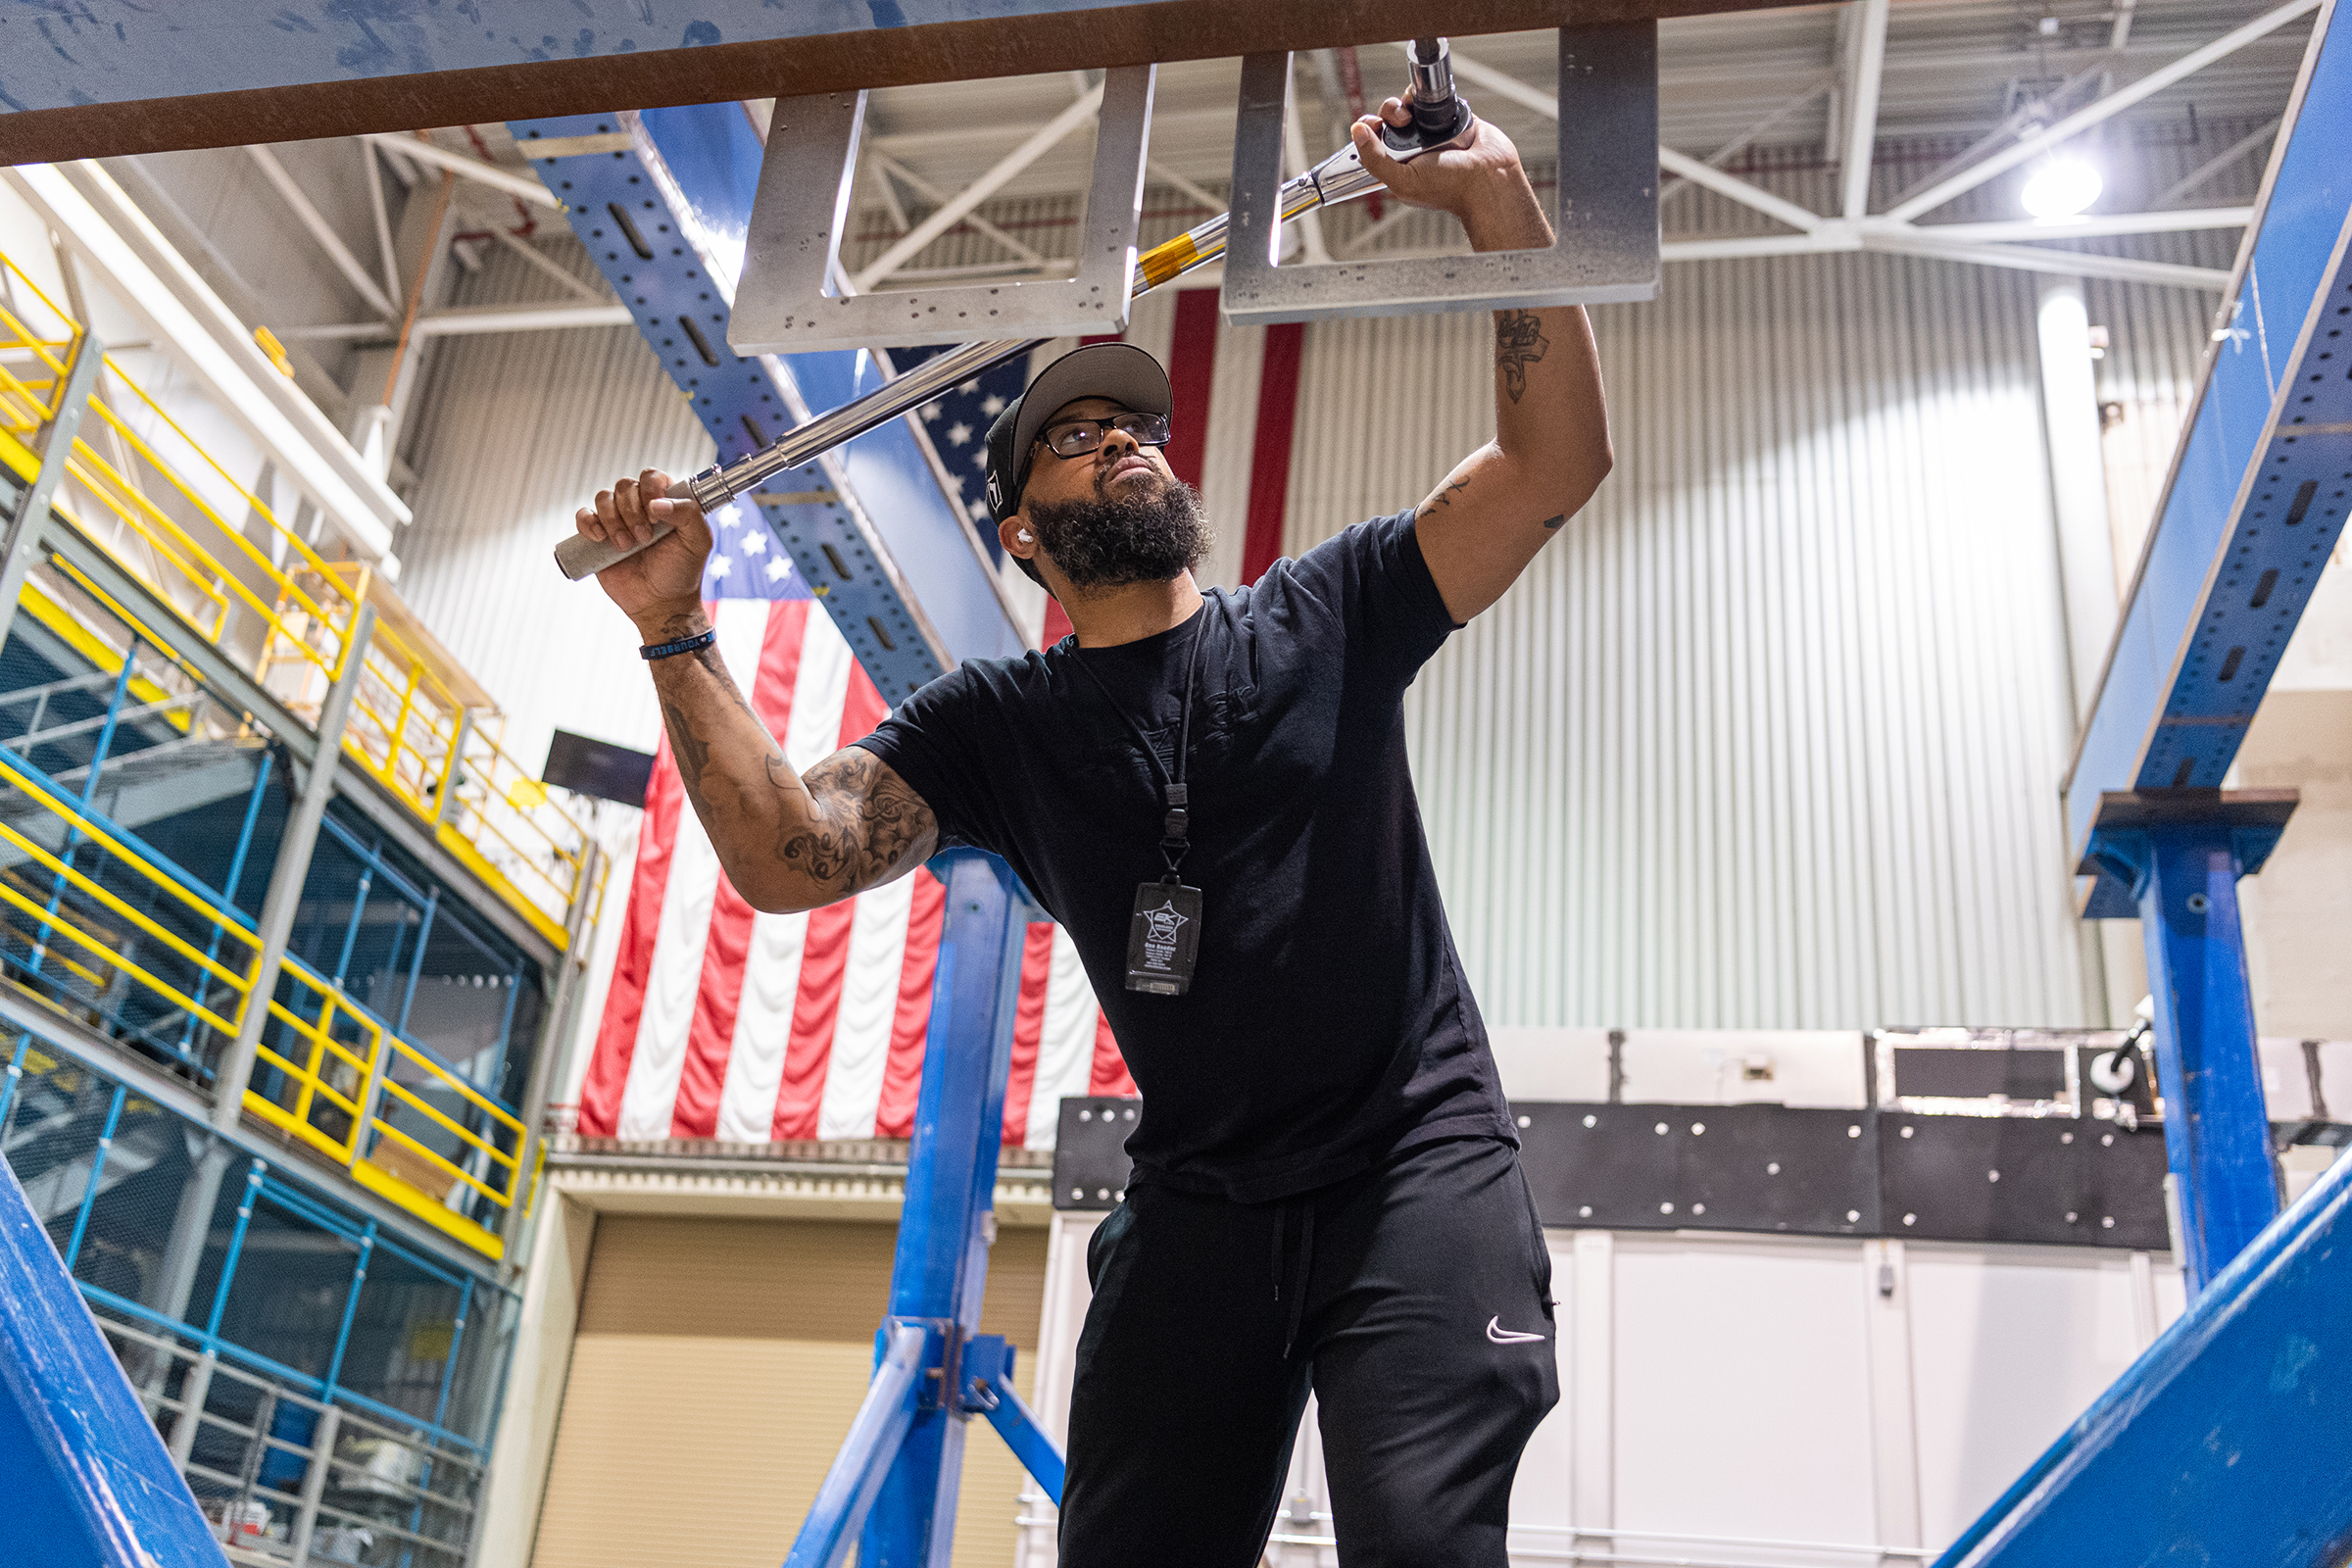 Mechanical engineering and integration technician Ivan Pratt installs brackets onto the static load testing platform in preparation of an OSAM-1 ground support equipment proof test at Goddard Space Flight Center, Greenbelt Md., July 19, 2023. NASA/Mike Guinto